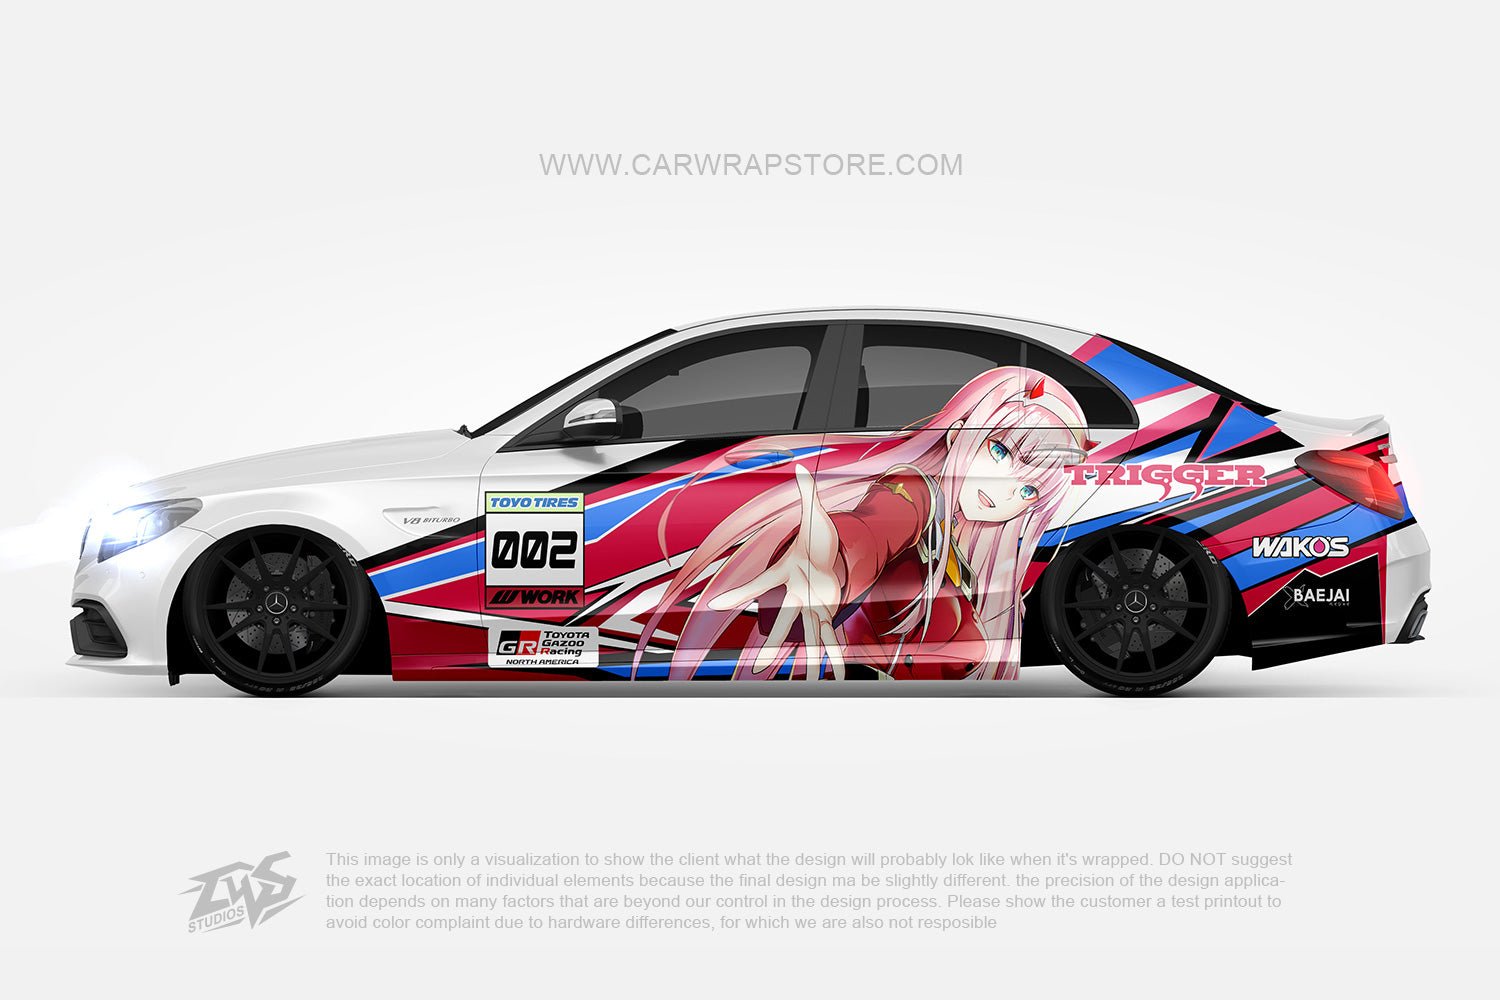 Zero Two DARLING in the FRANXX【002-12】 - Car Wrap Store